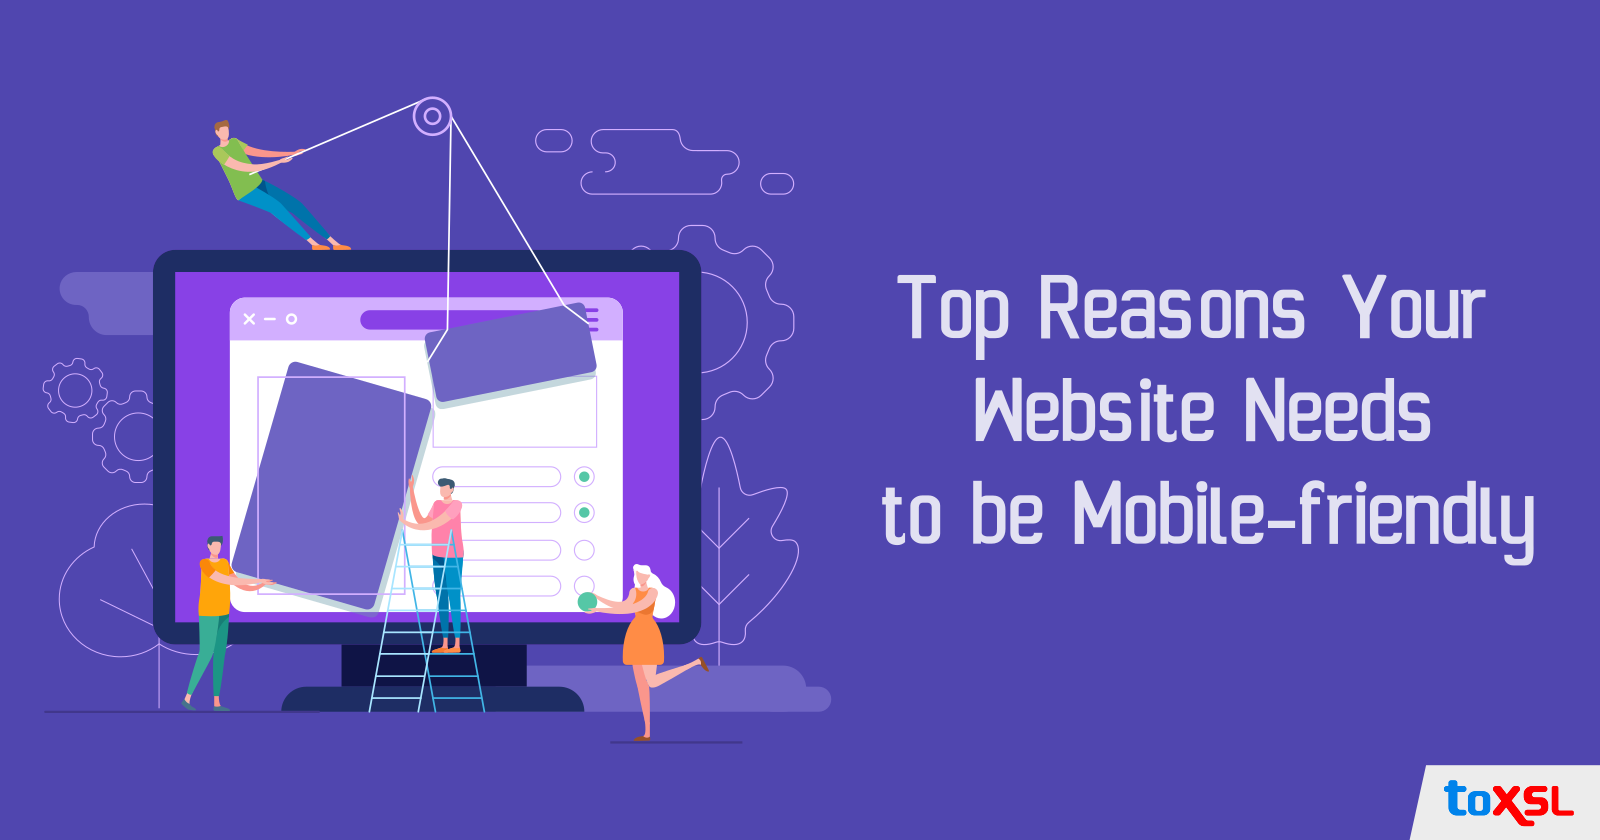 Attract Potential Customers With Responsive Website Design